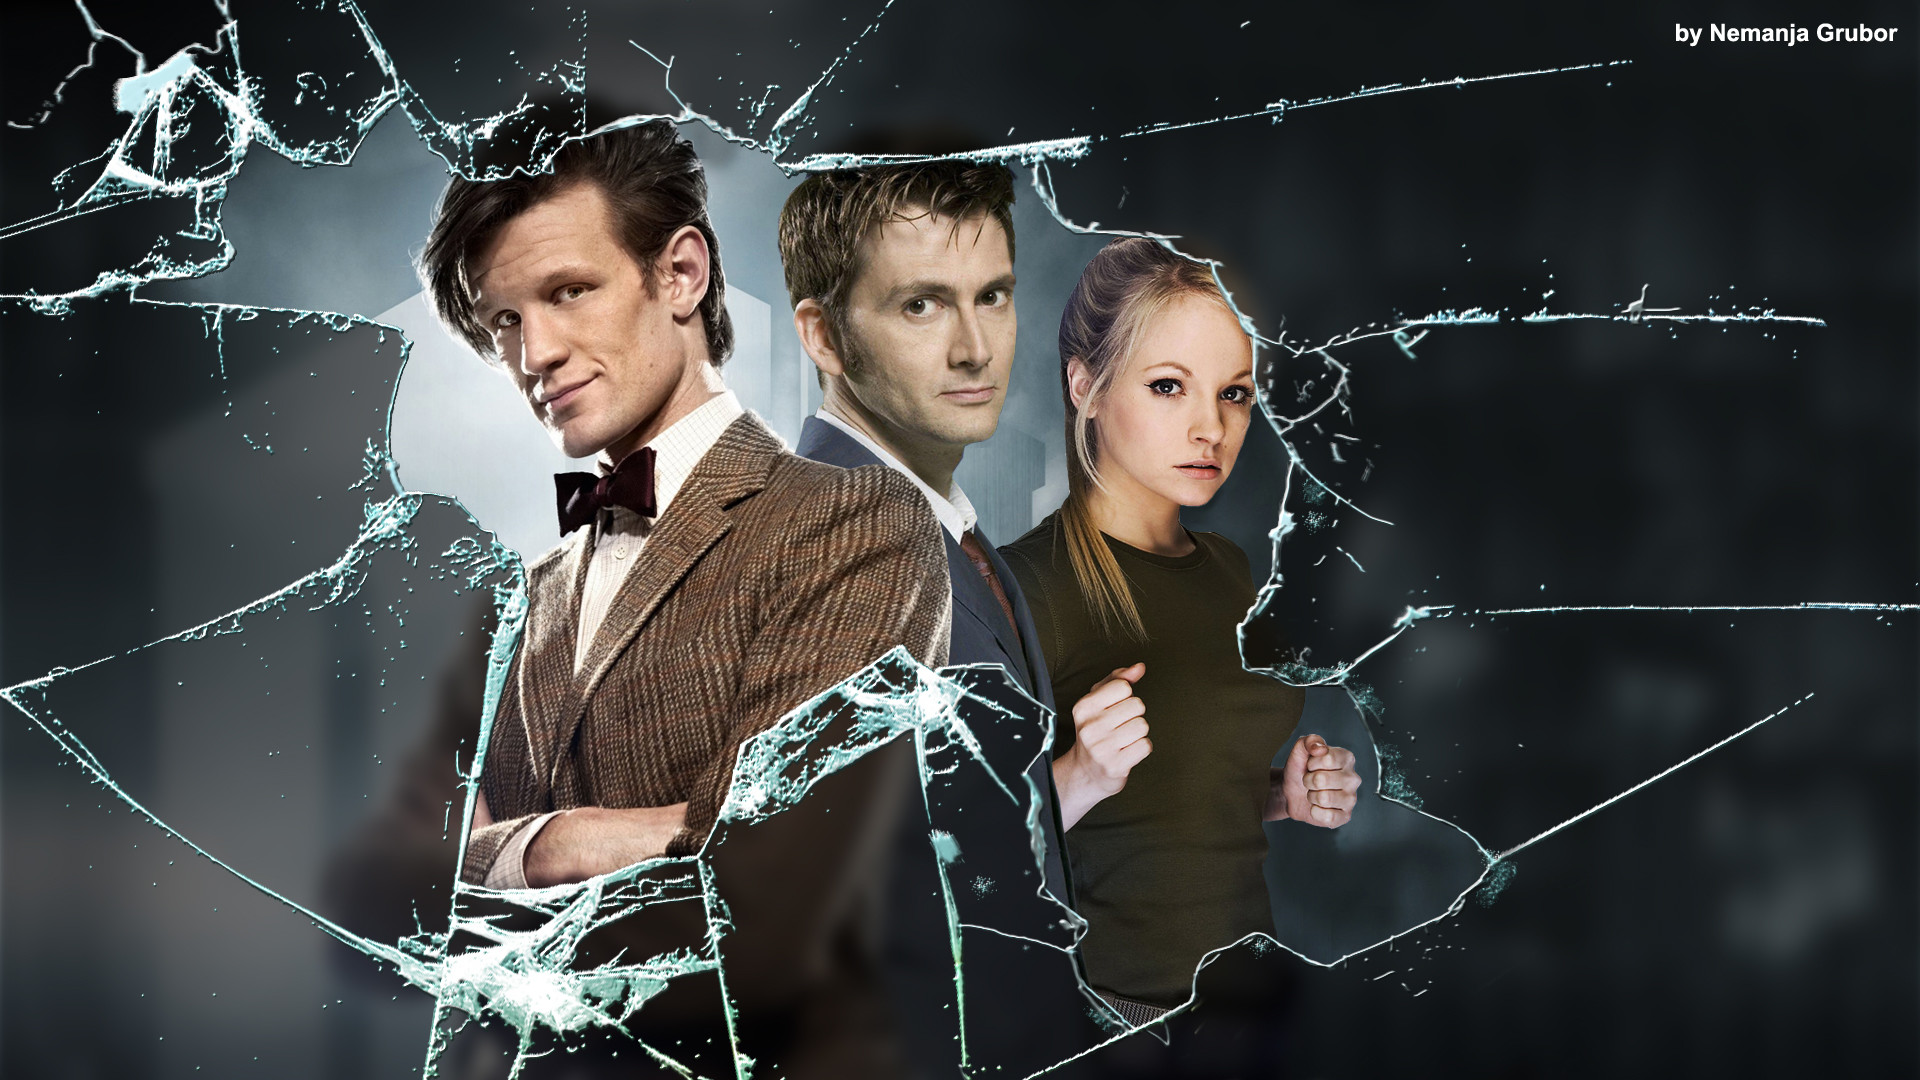 1920x1080 ... Doctor Who broken glass wallpaper by ngrubor